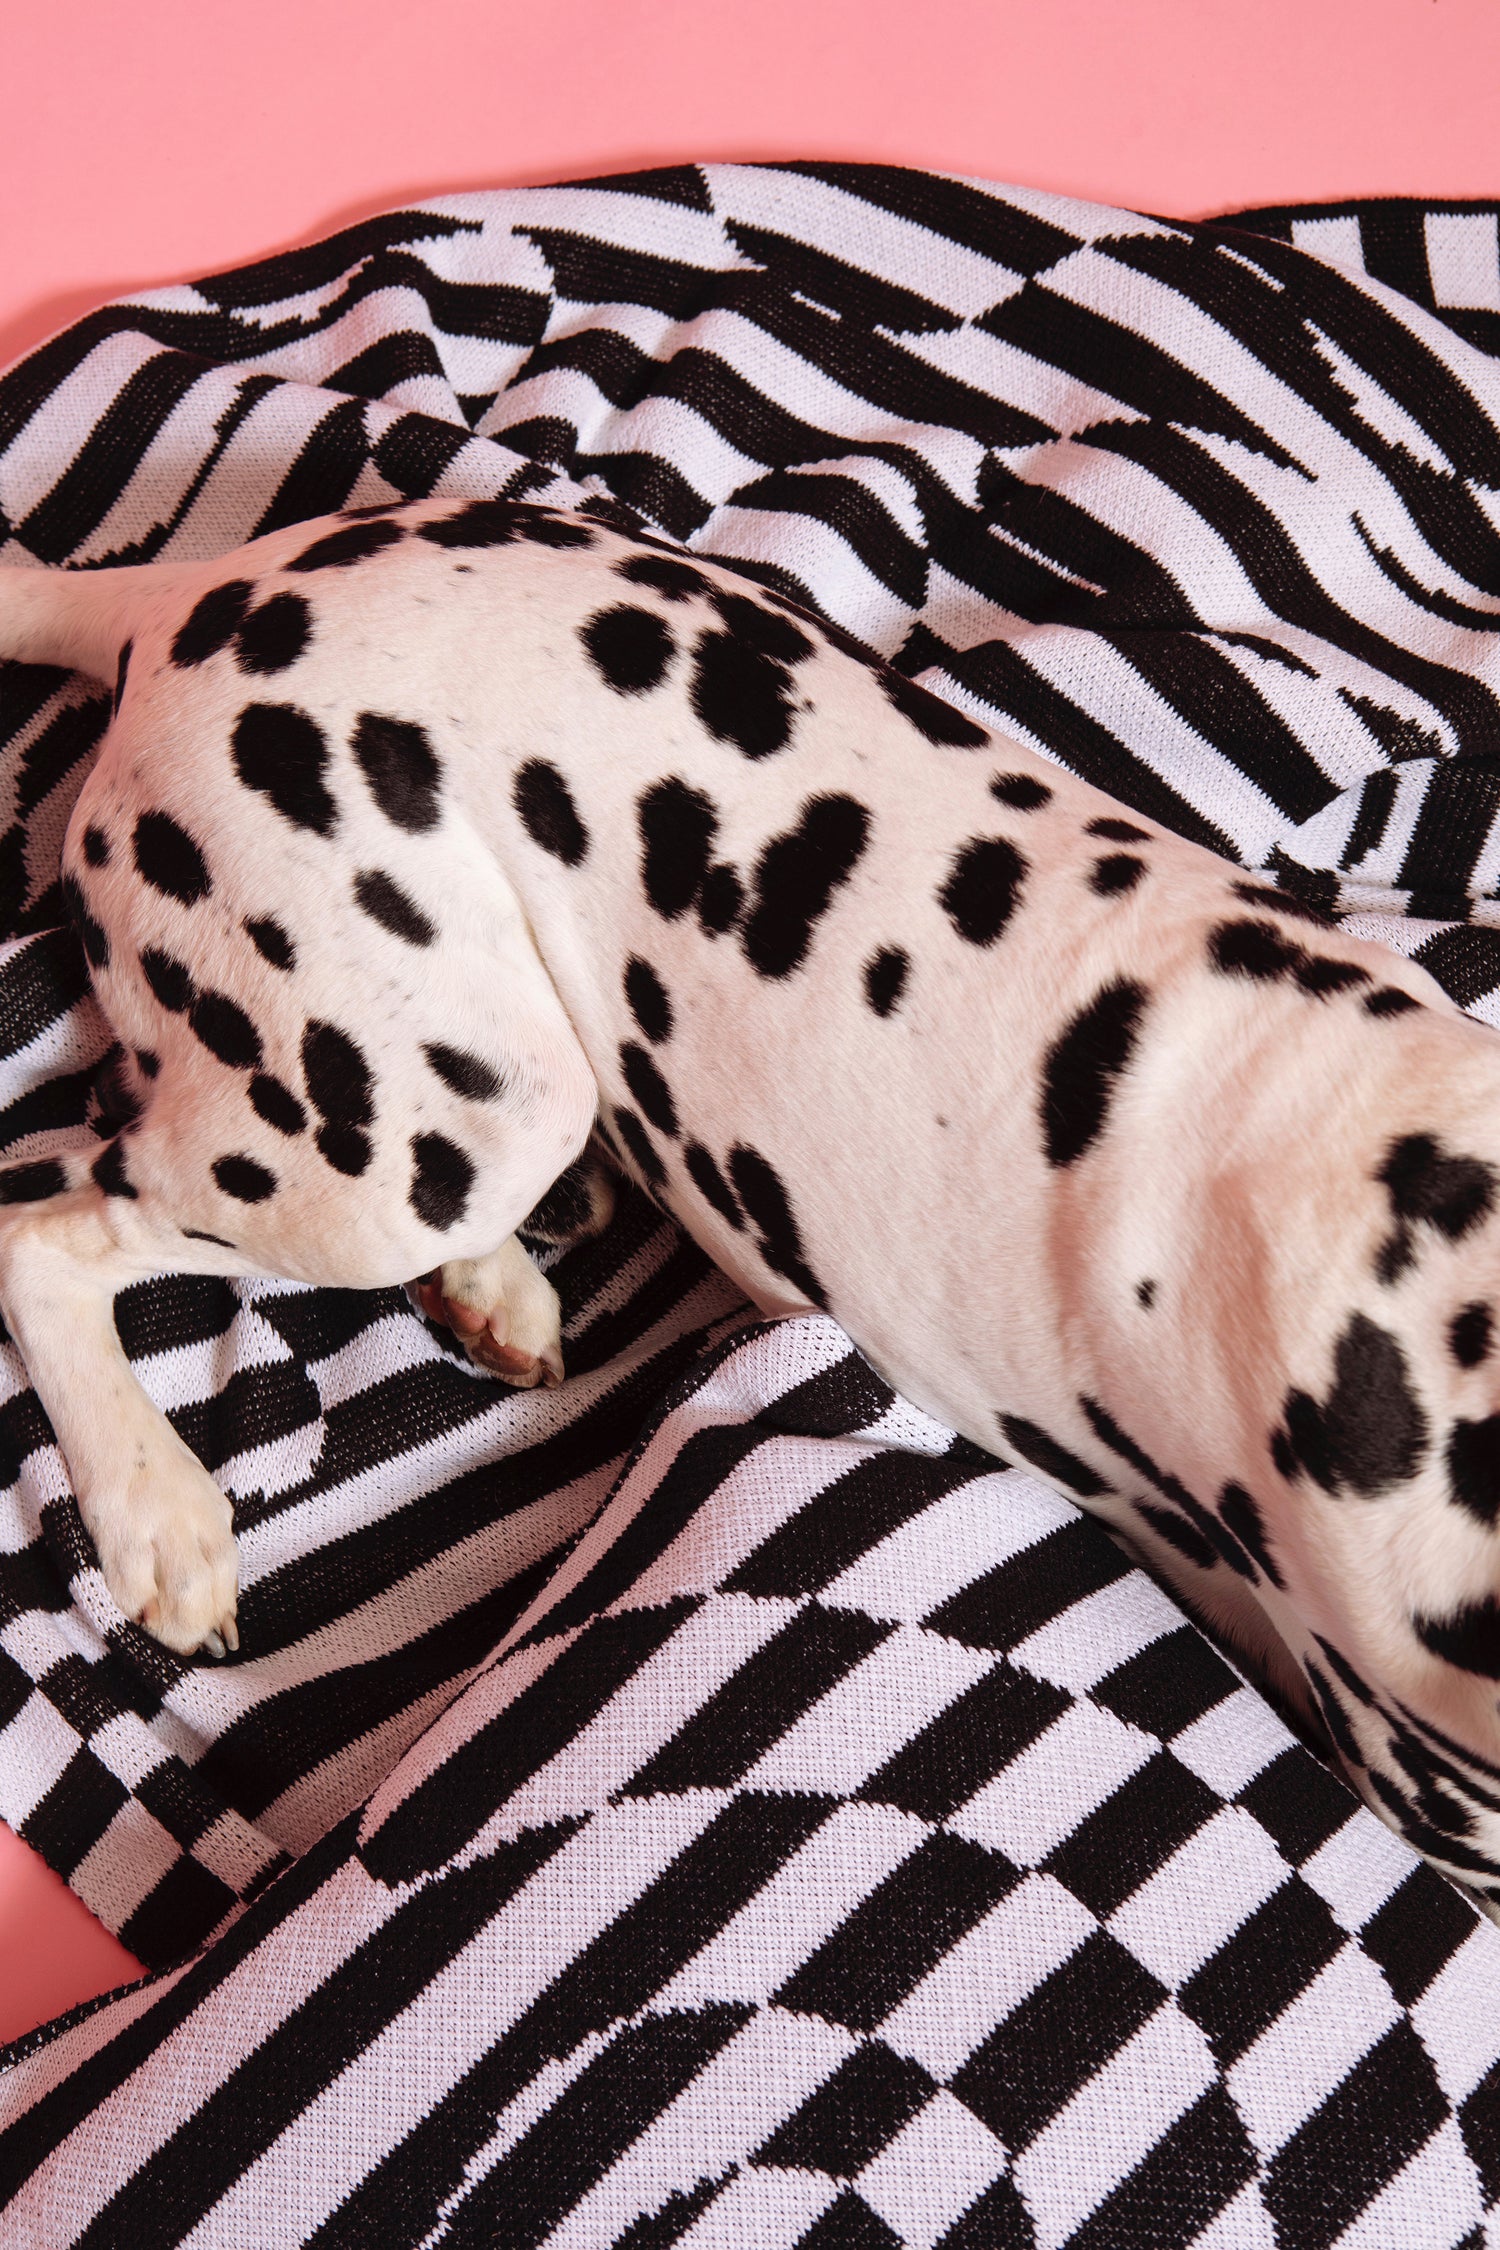 Detail image of Dalmatian dog laying on top of the Dazzle Blanket spread on the floor with the matching Dazzle Pillow Cover.